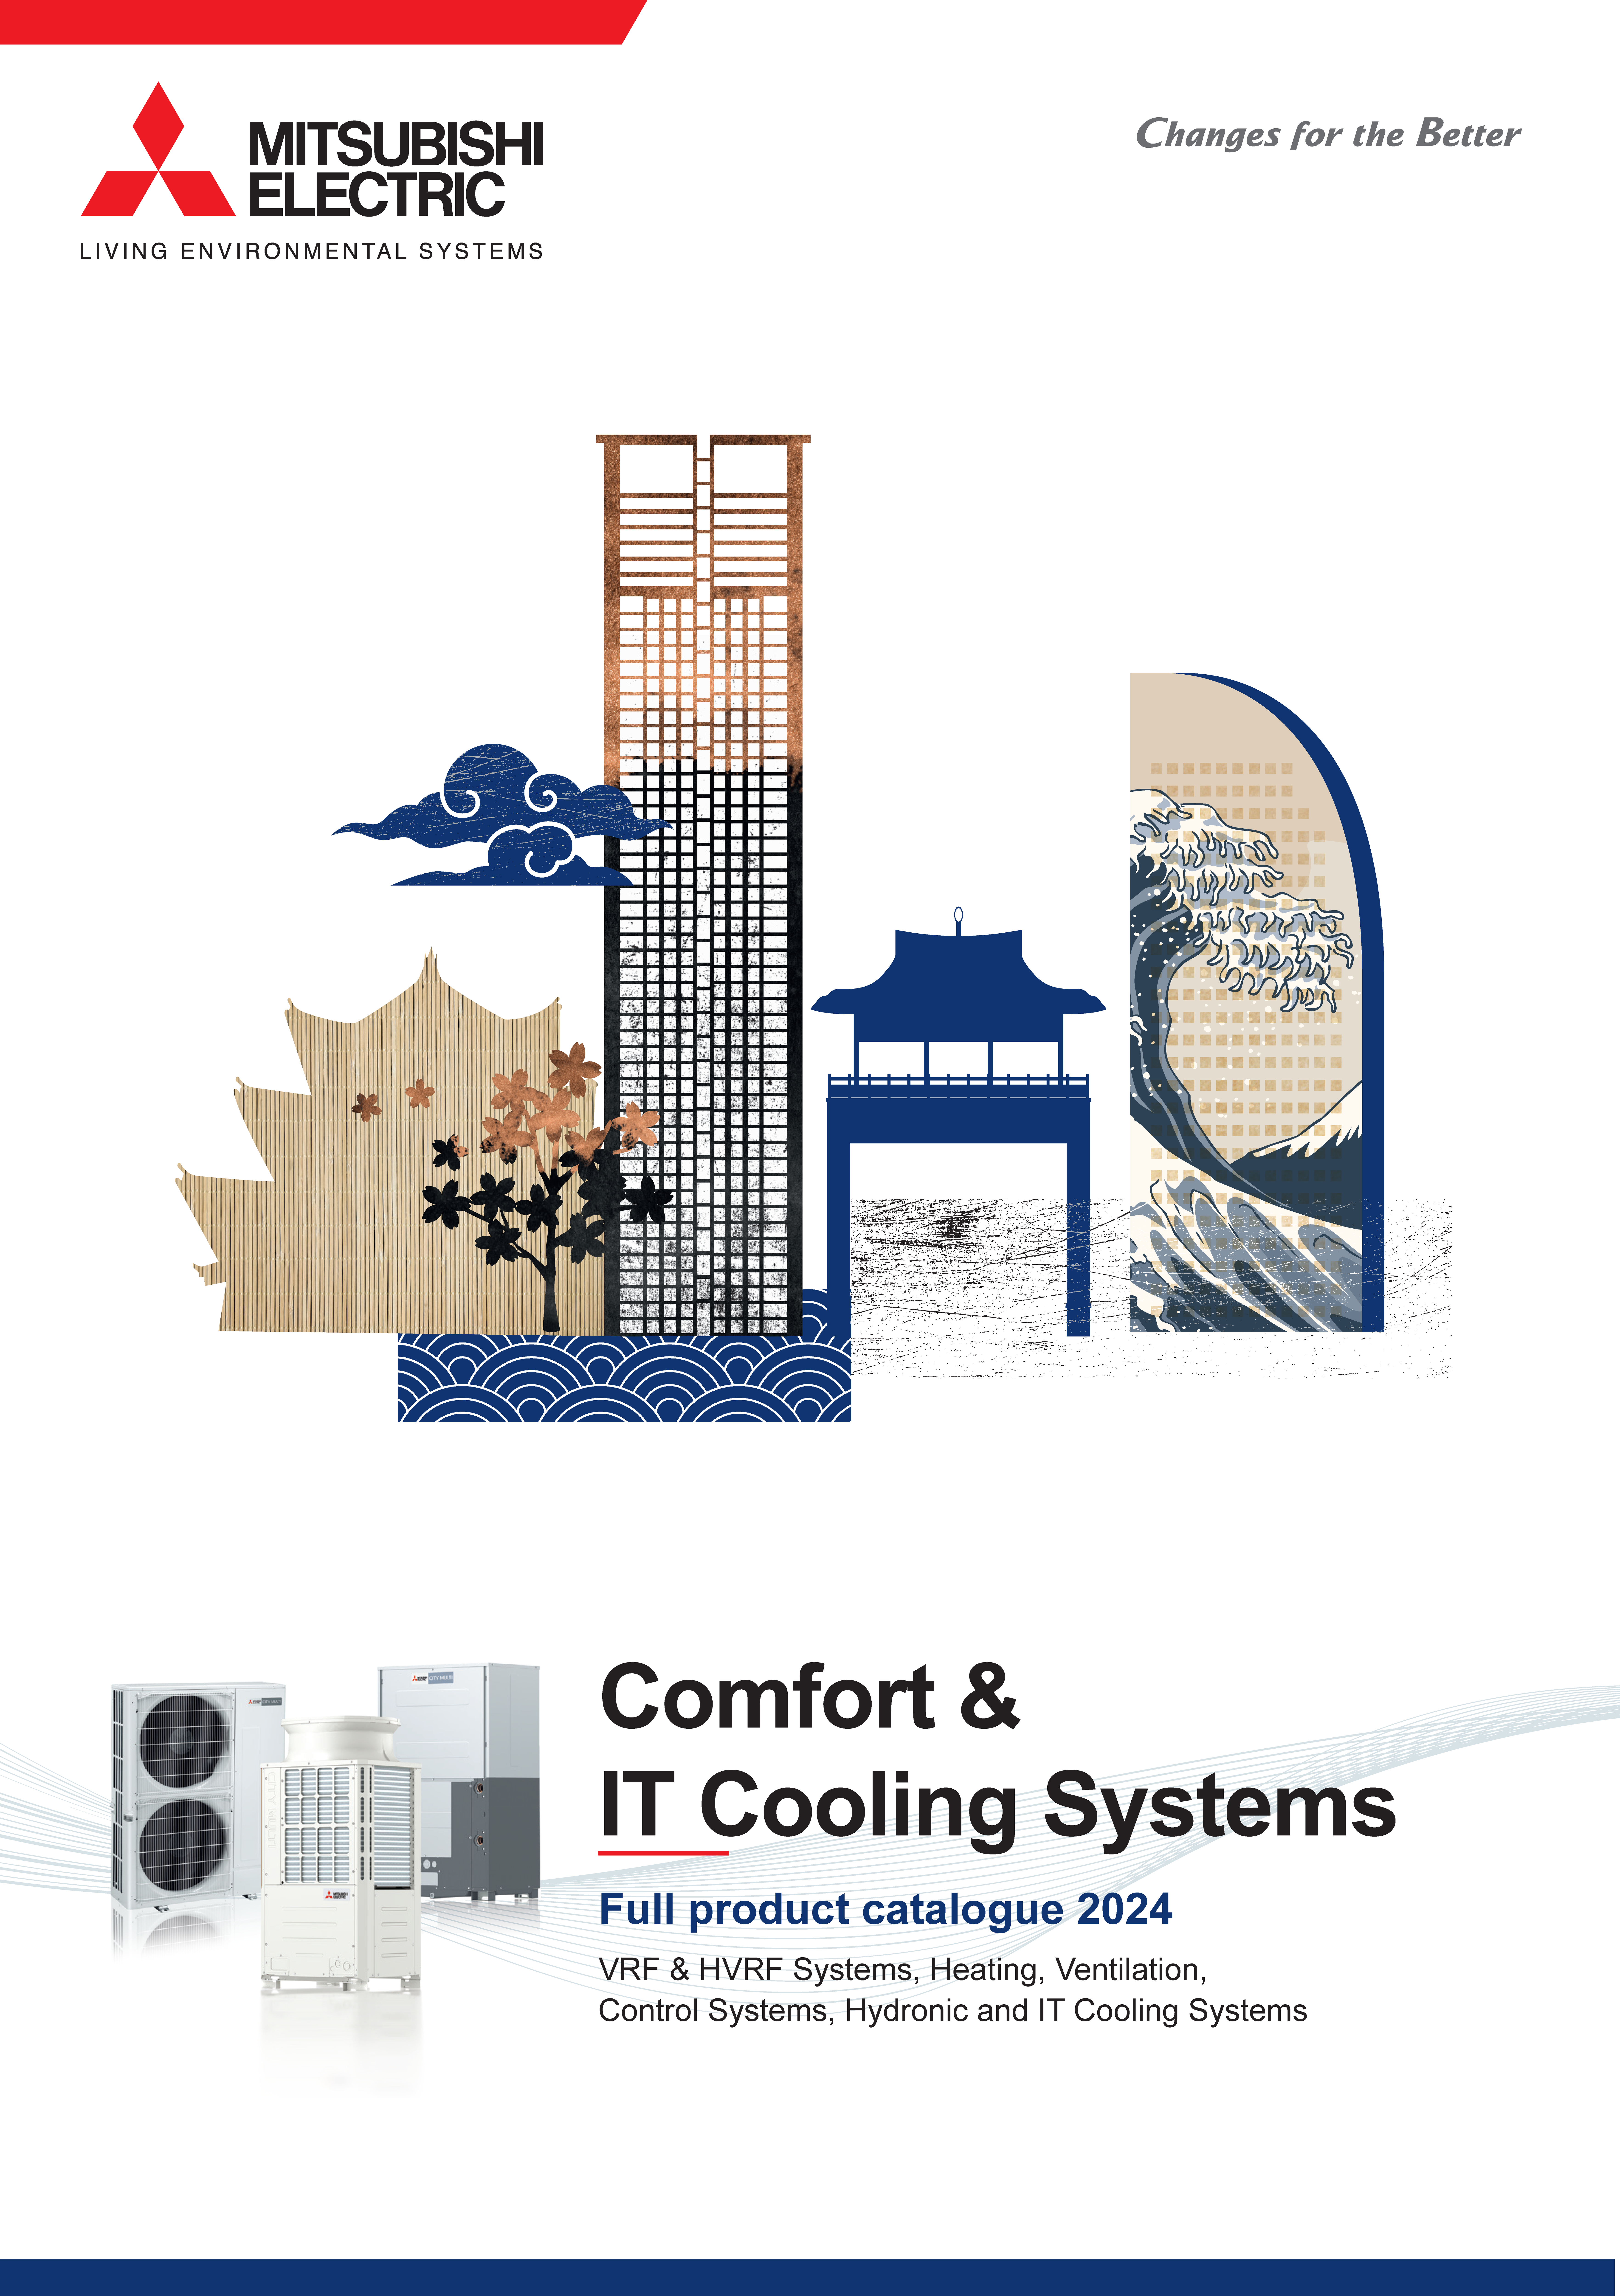 Comfort & IT Cooling Systems 2024.